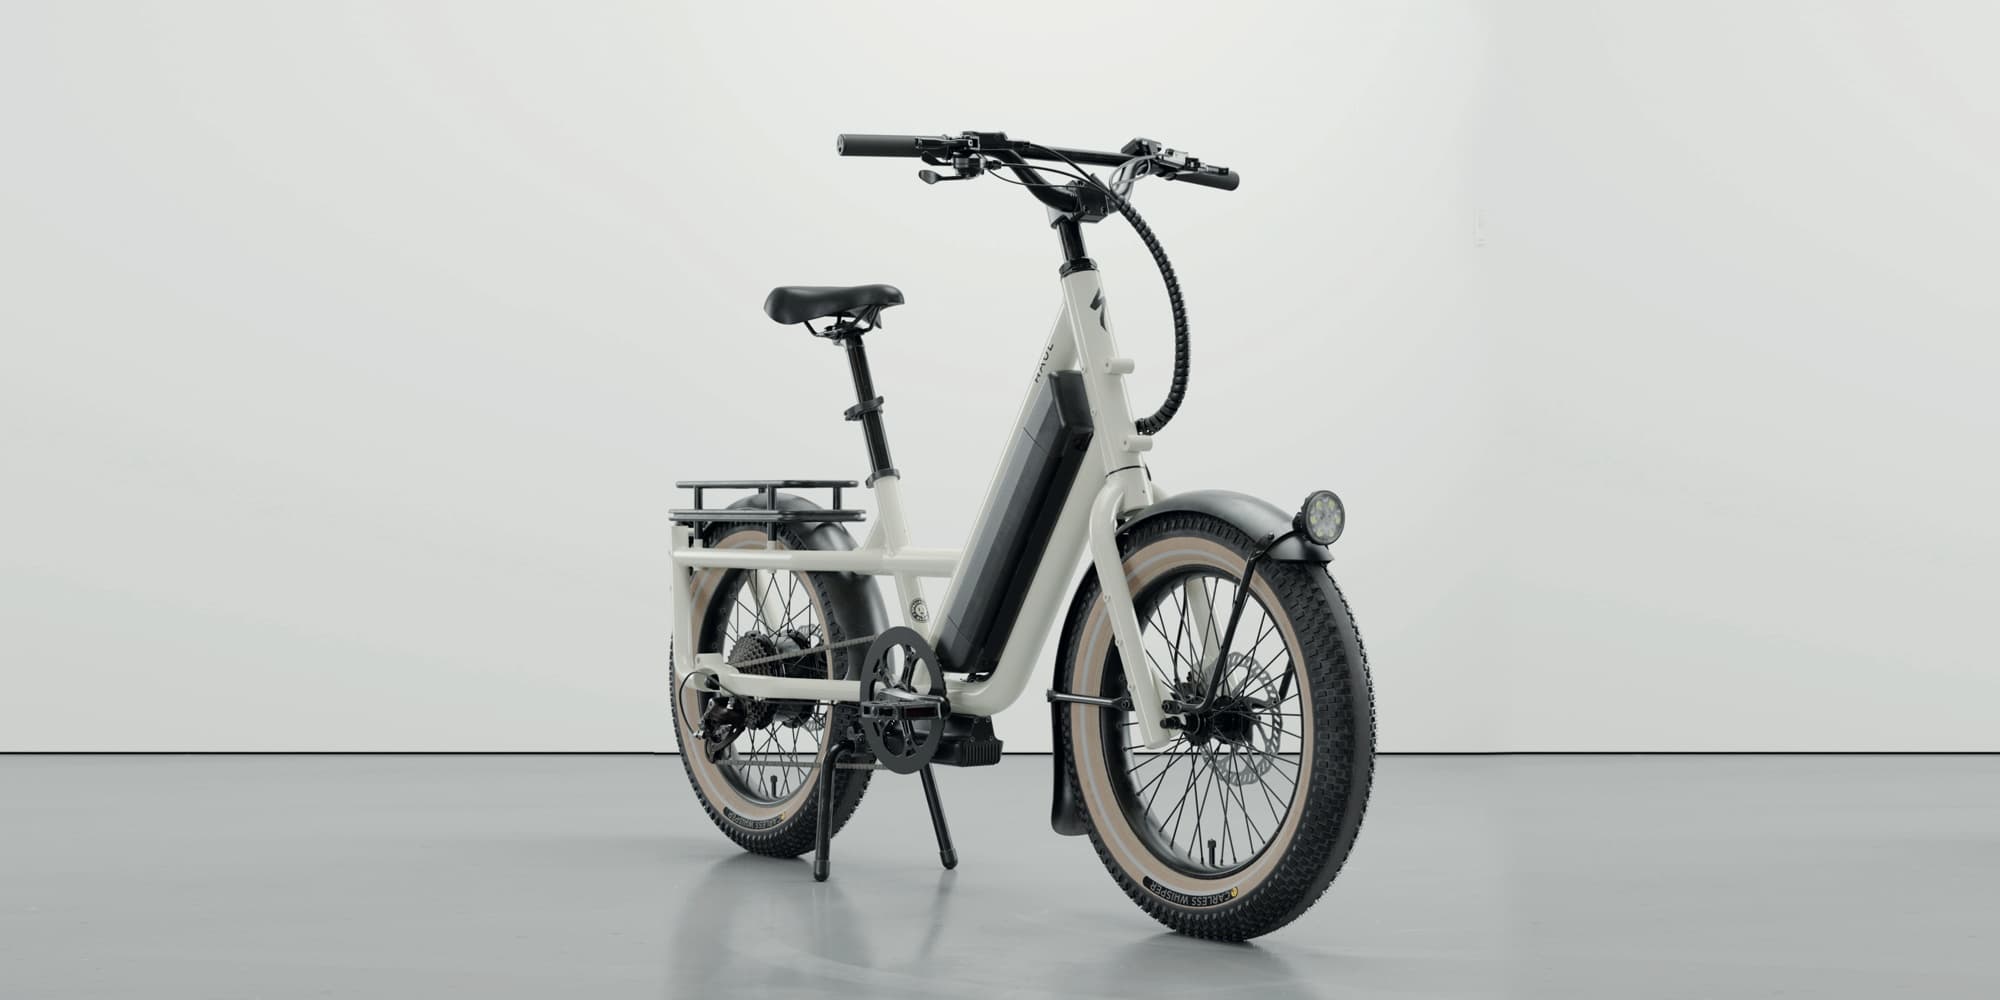 california-set-aside-10m-for-electric-bike-rebates-so-where-is-it